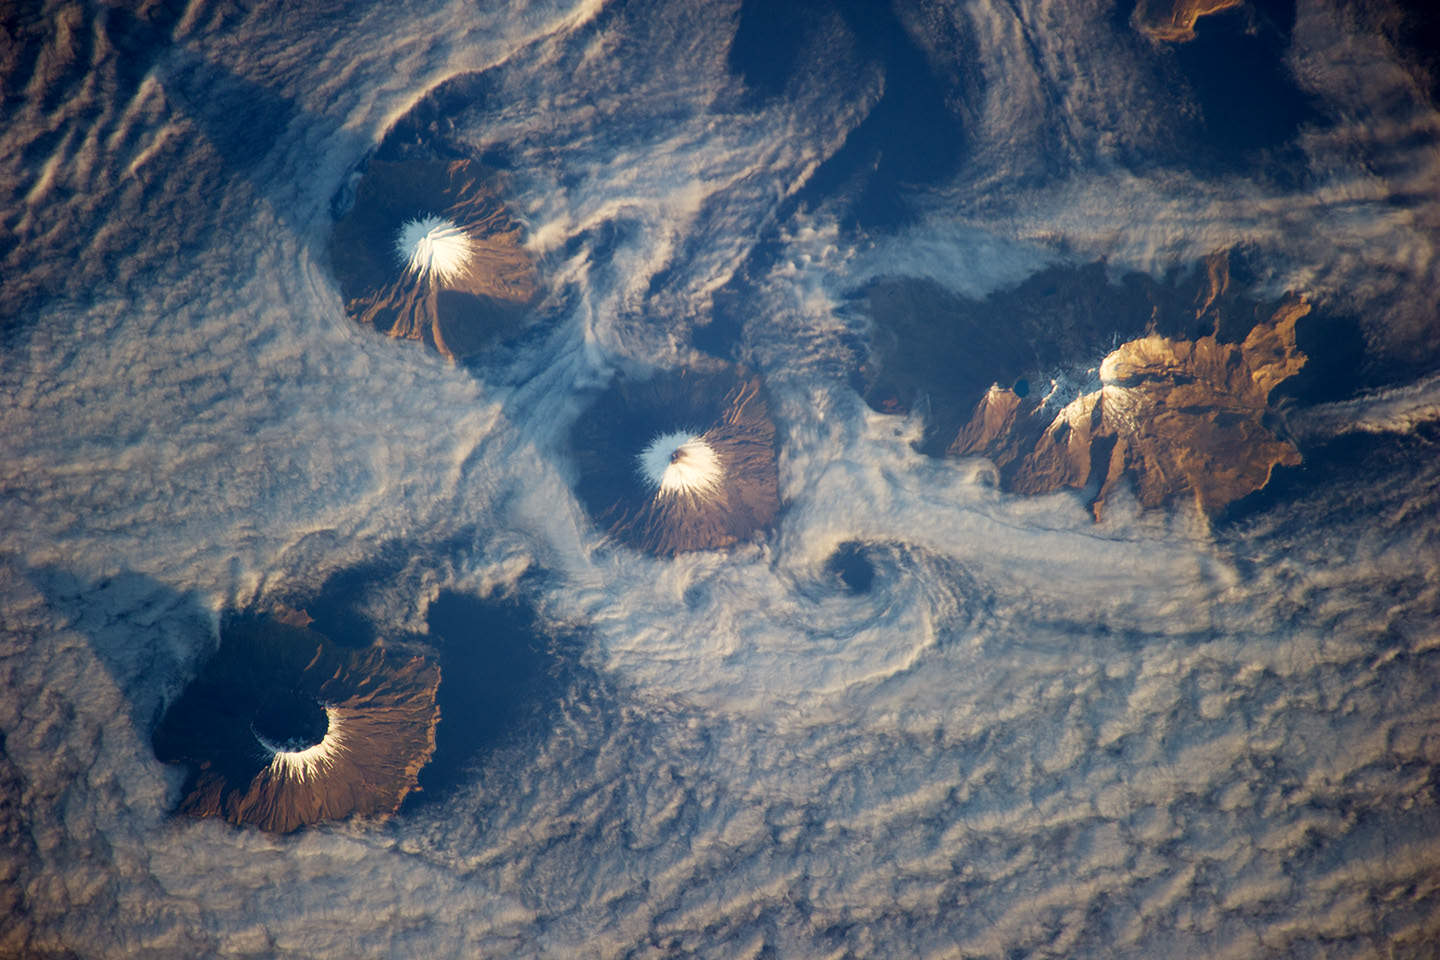 Clouds swirl around the Islands of the Four Mountains in Alaska’s Aleutian chain.